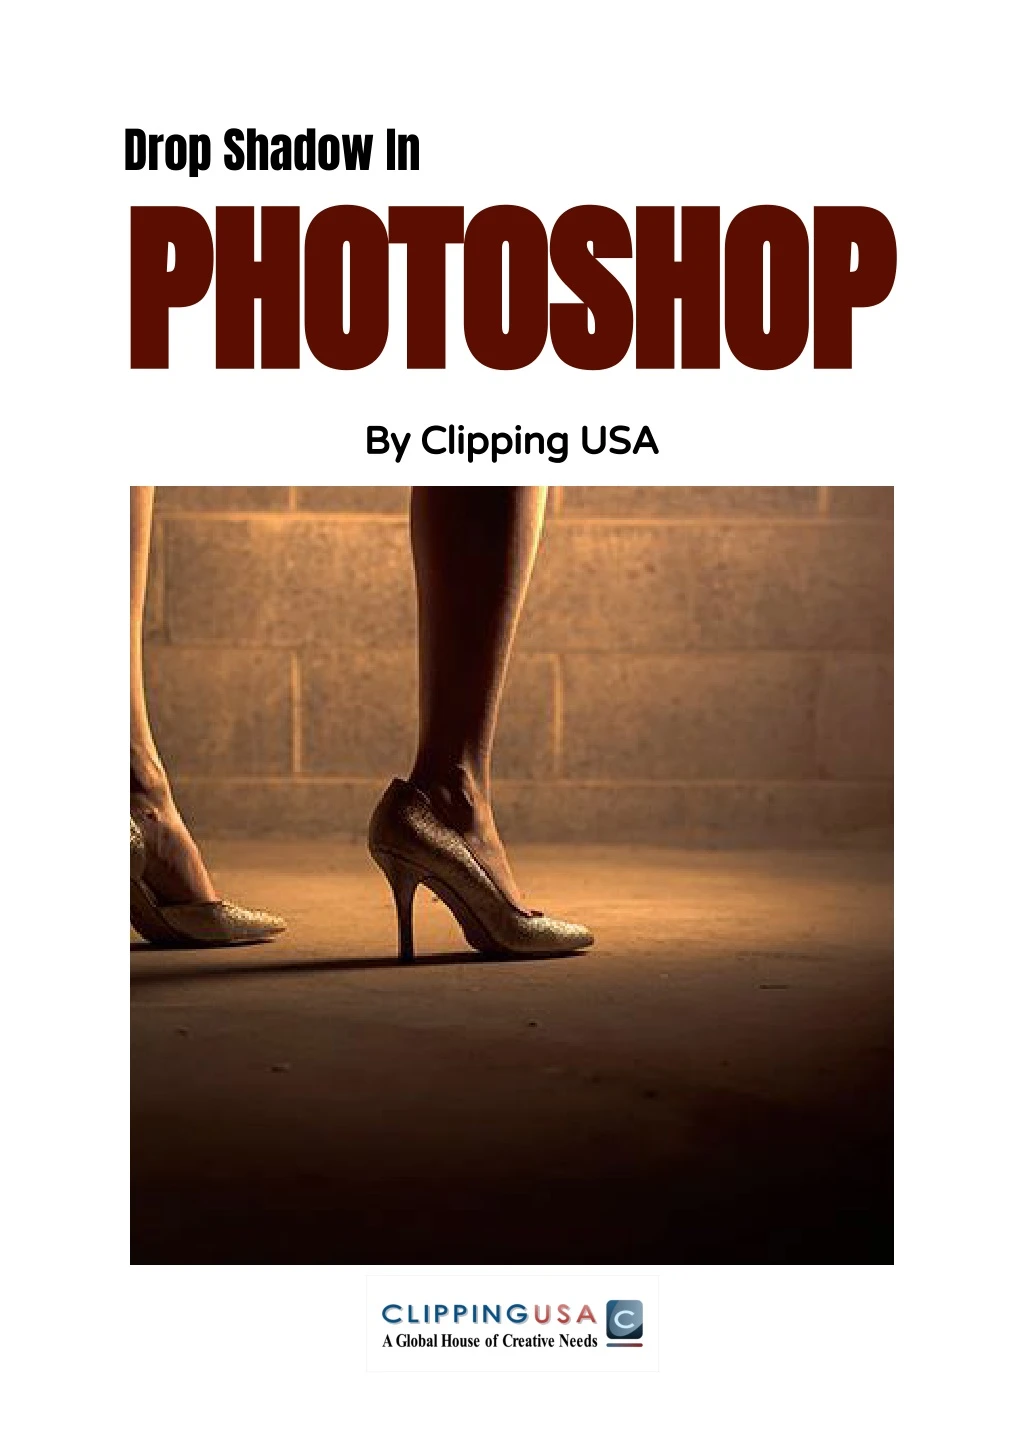 photoshop by clipping usa